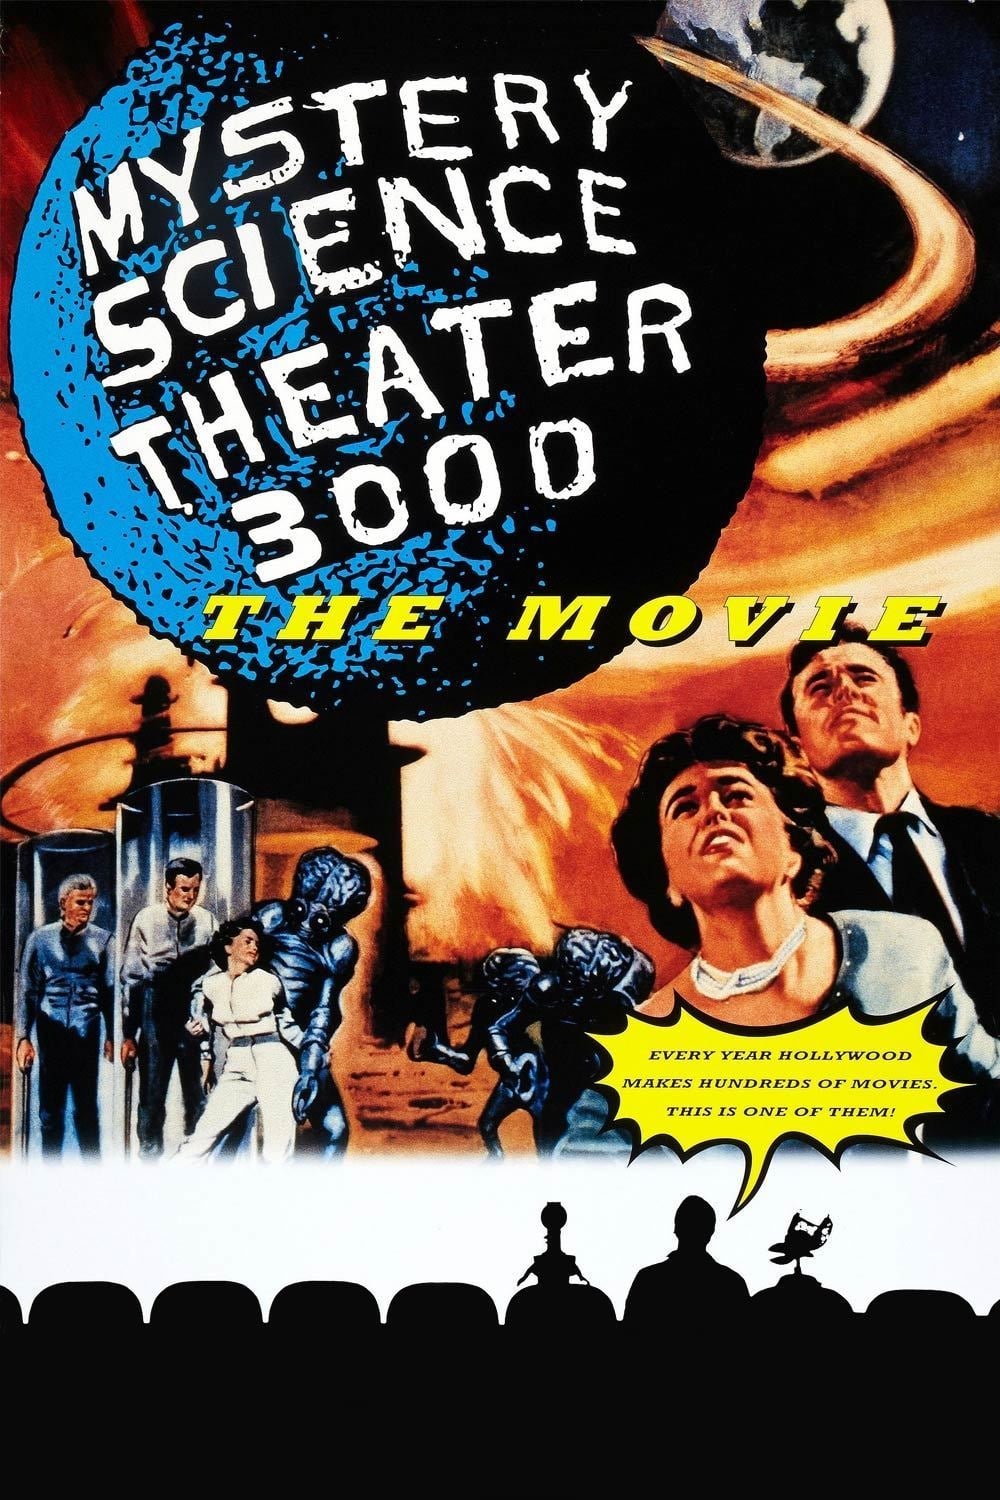 MYSTERY SCIENCE THEATRE 3000: THE MOVIE